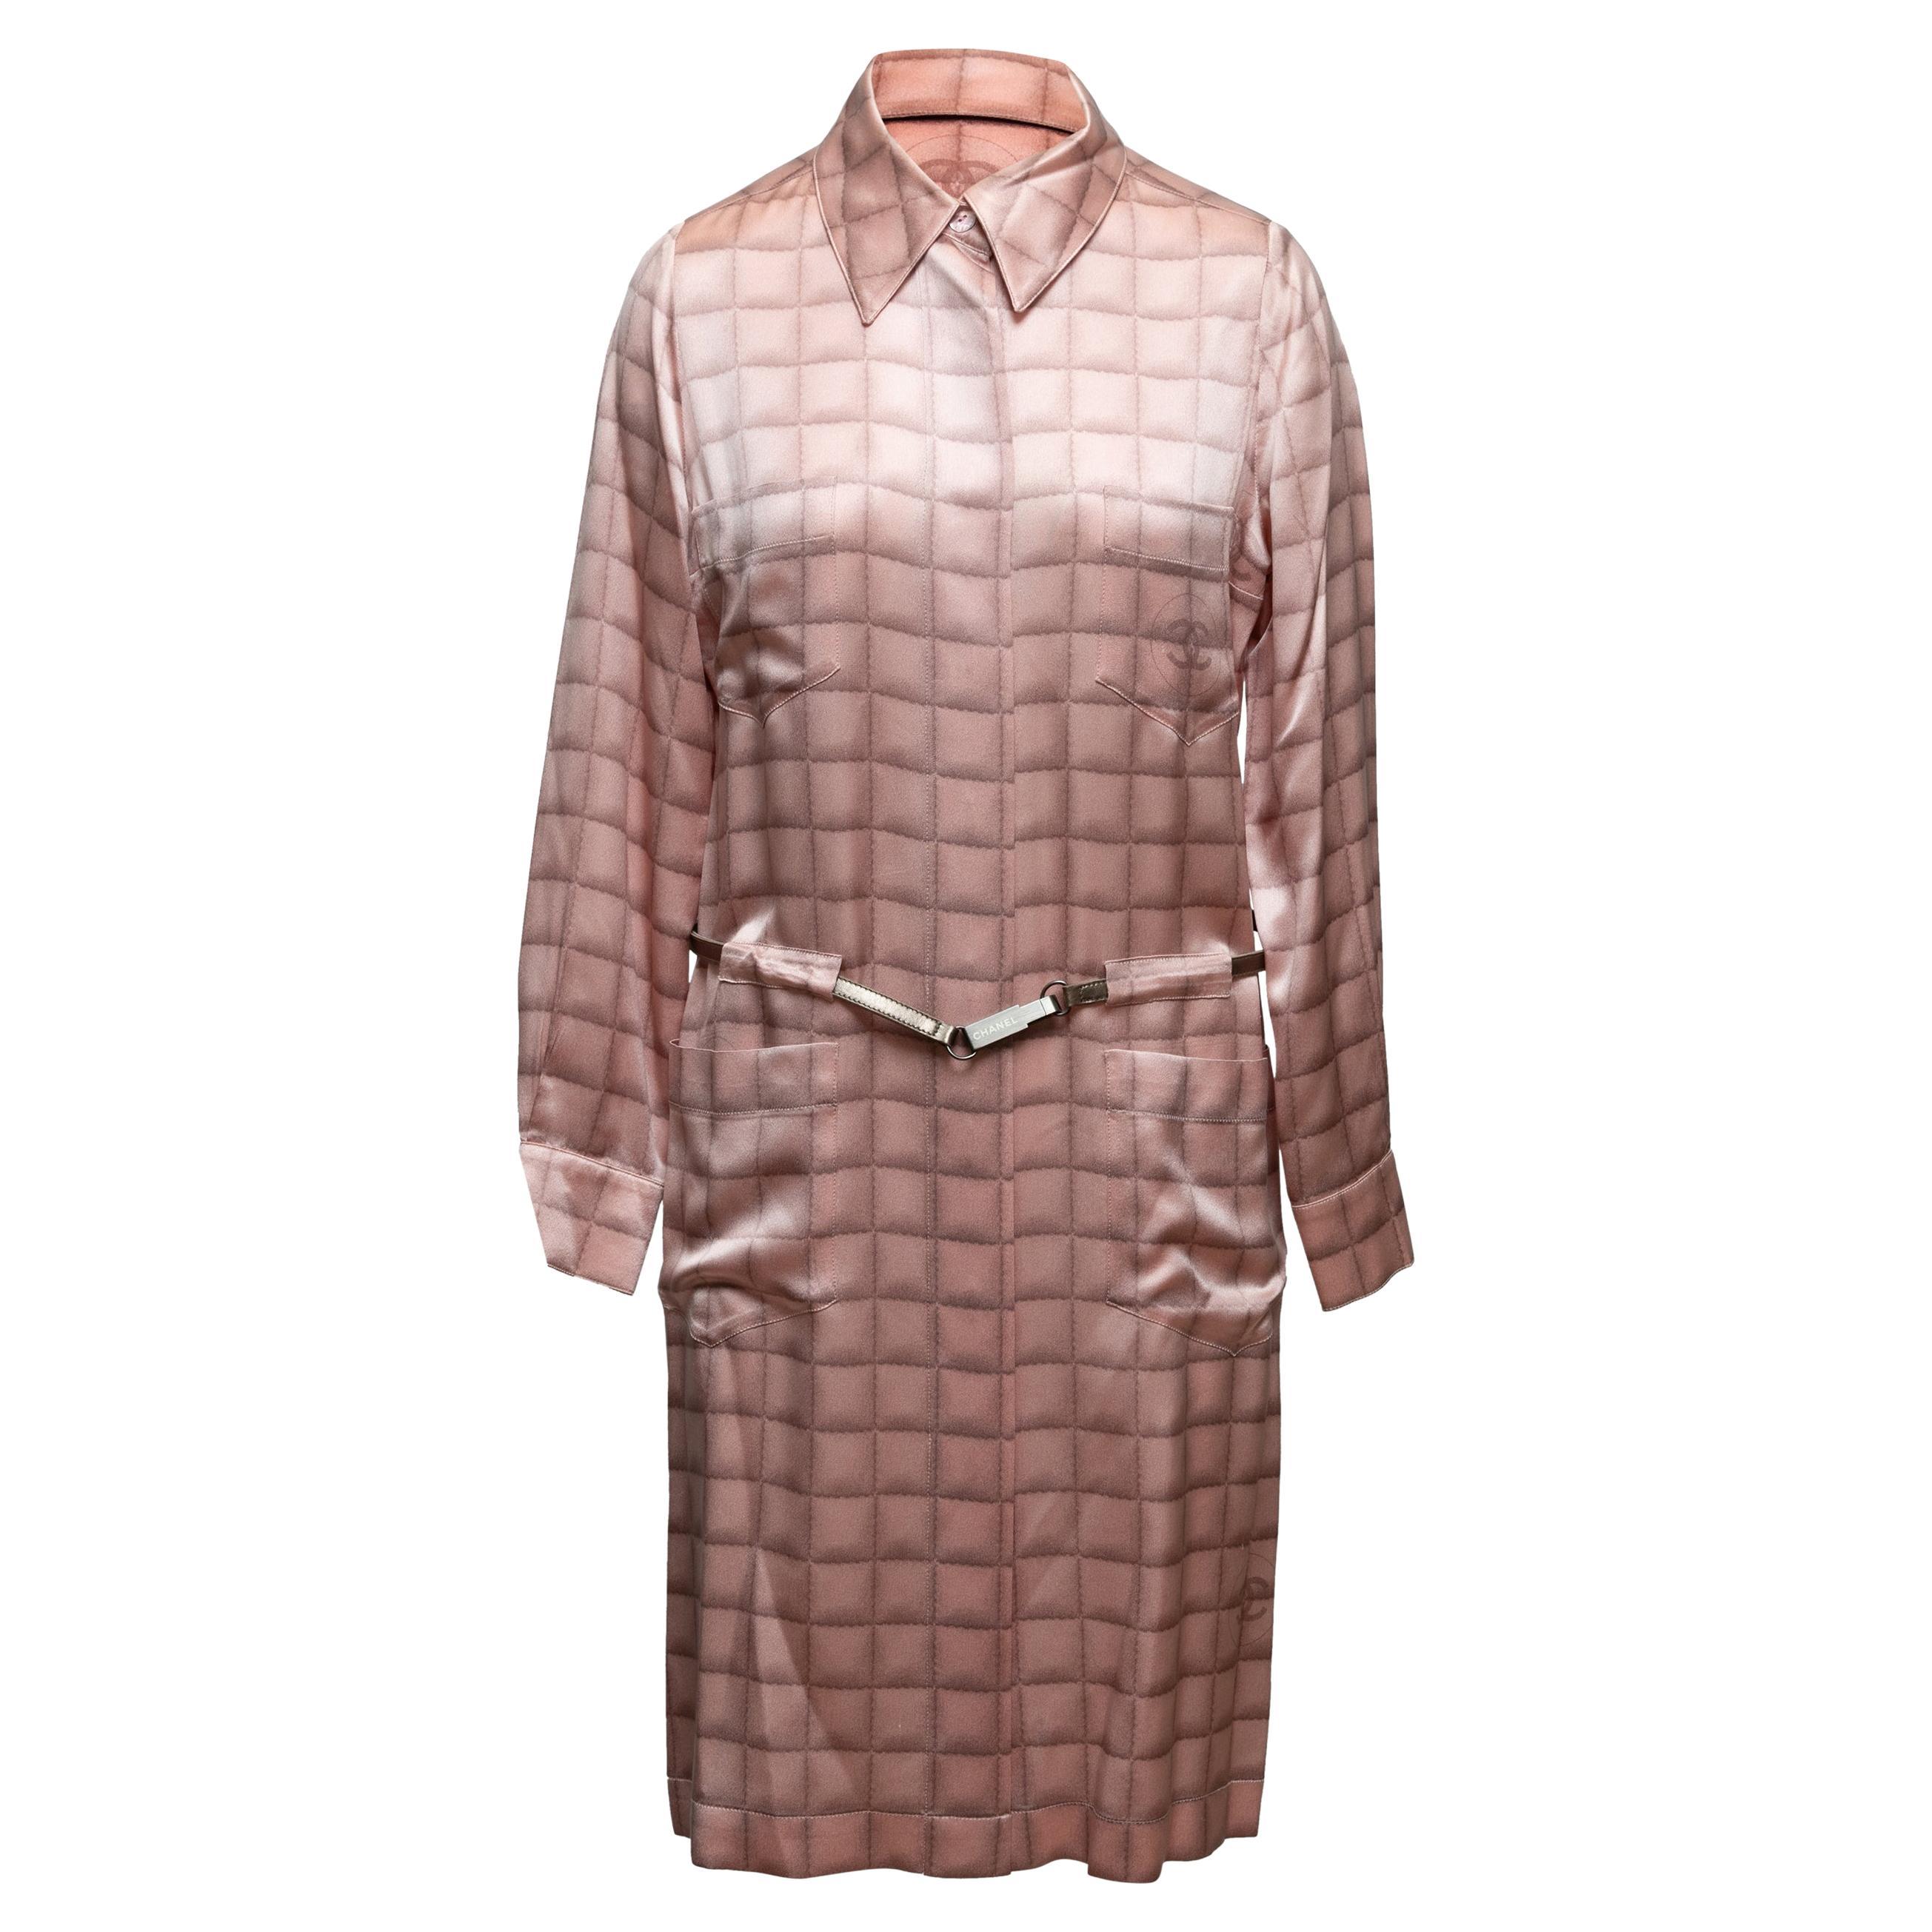 Vintage Light Pink Chanel Fall/Winter 2000 Printed Silk Dress Size FR 42 For Sale